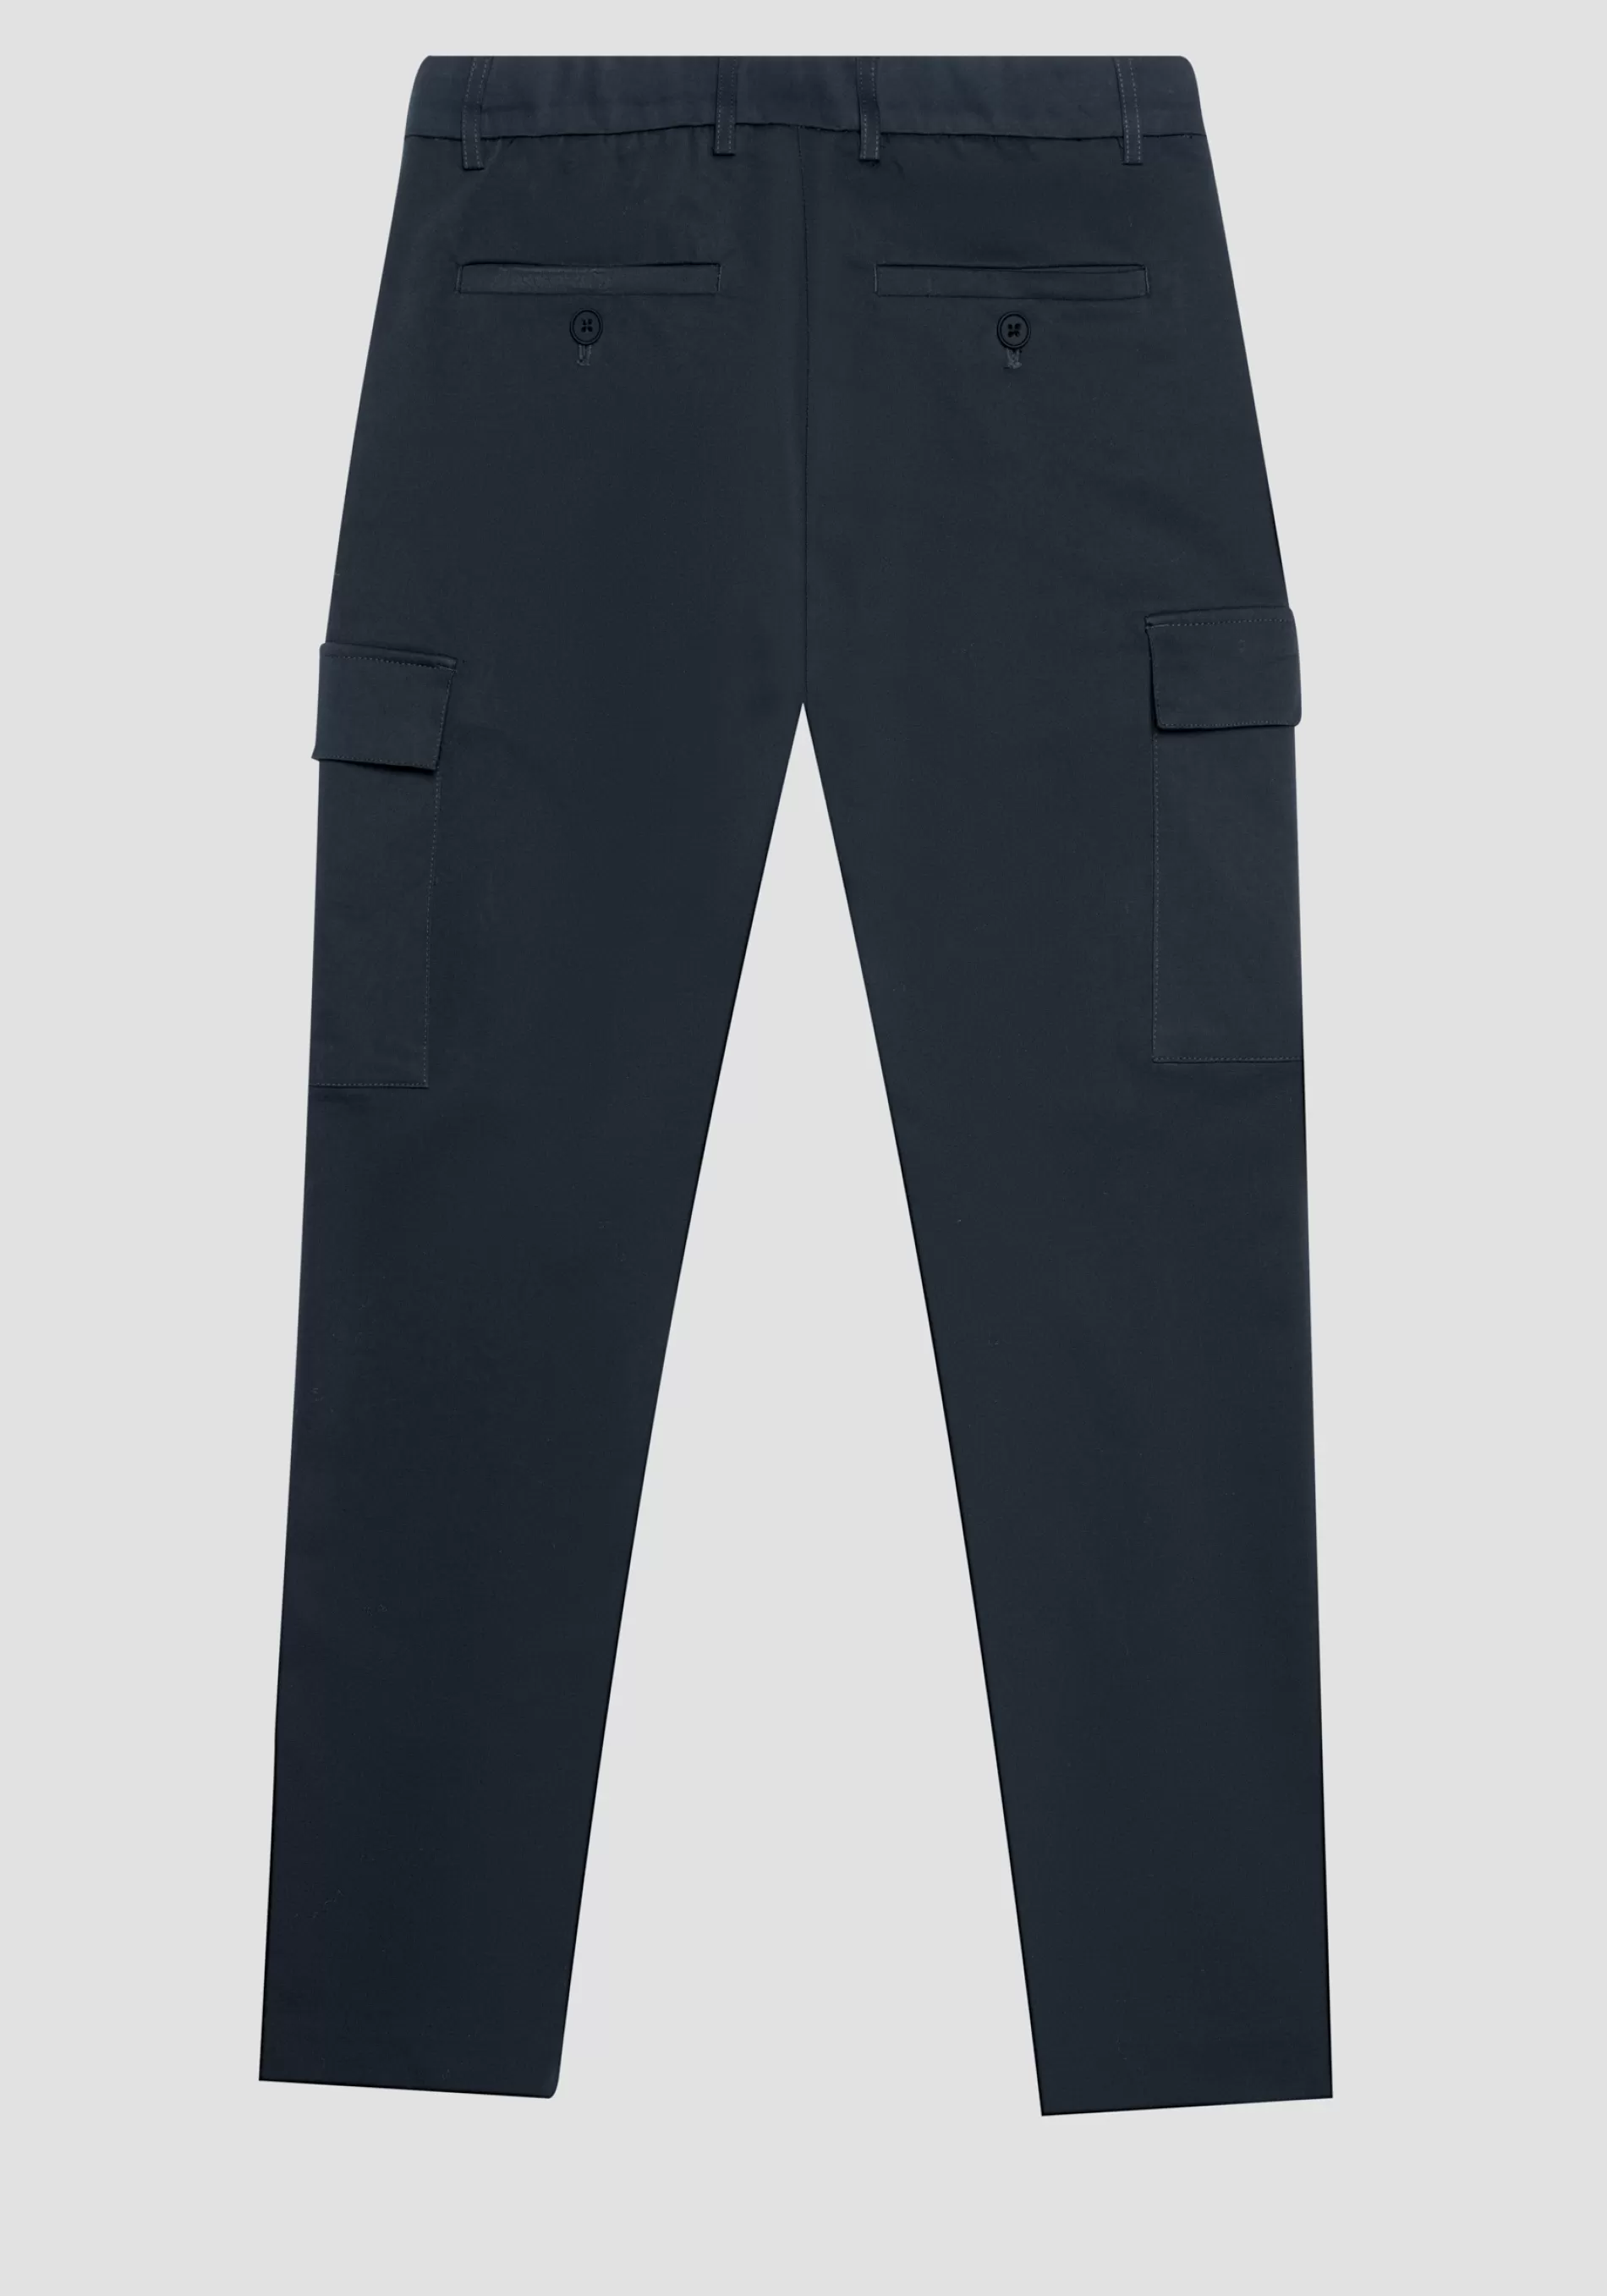 Best "BJORN" SKINNY FIT TROUSERS IN ELASTIC COTTON BLEND WITH SIDE POCKETS AND ZIP ON THE BOTTOM Trousers